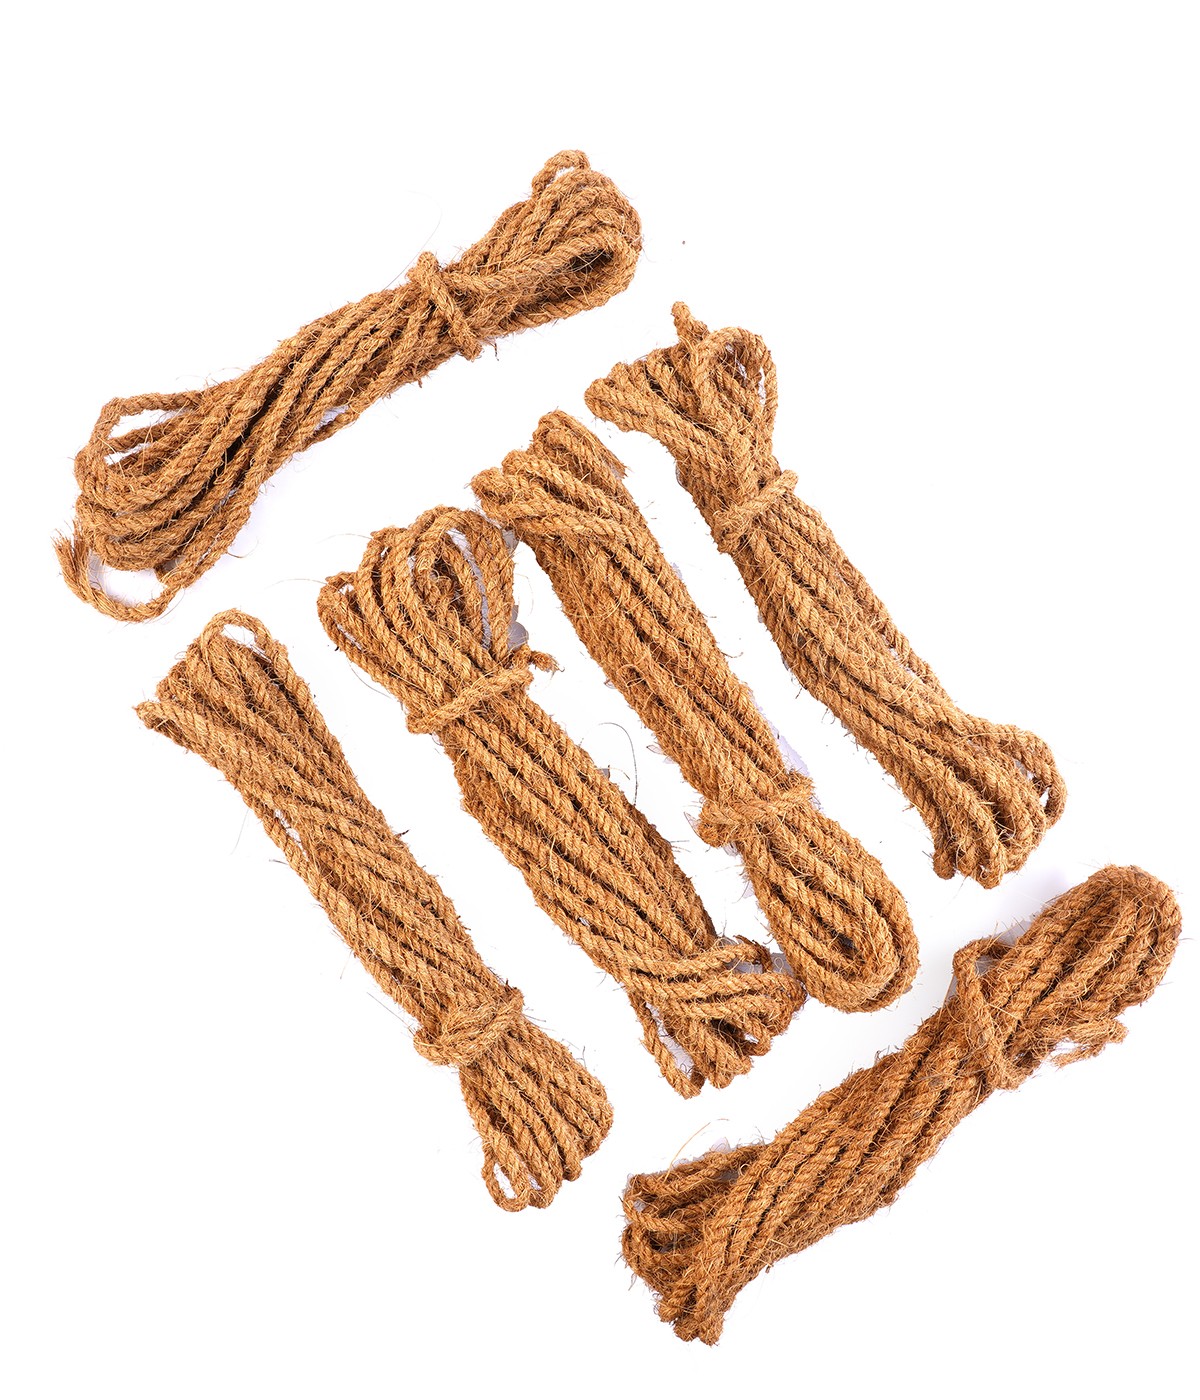 Premium Quality Coir Rope - Natural, Durable Twine for Crafts, Gardening,  and More – Coconut Coir Rope (Each